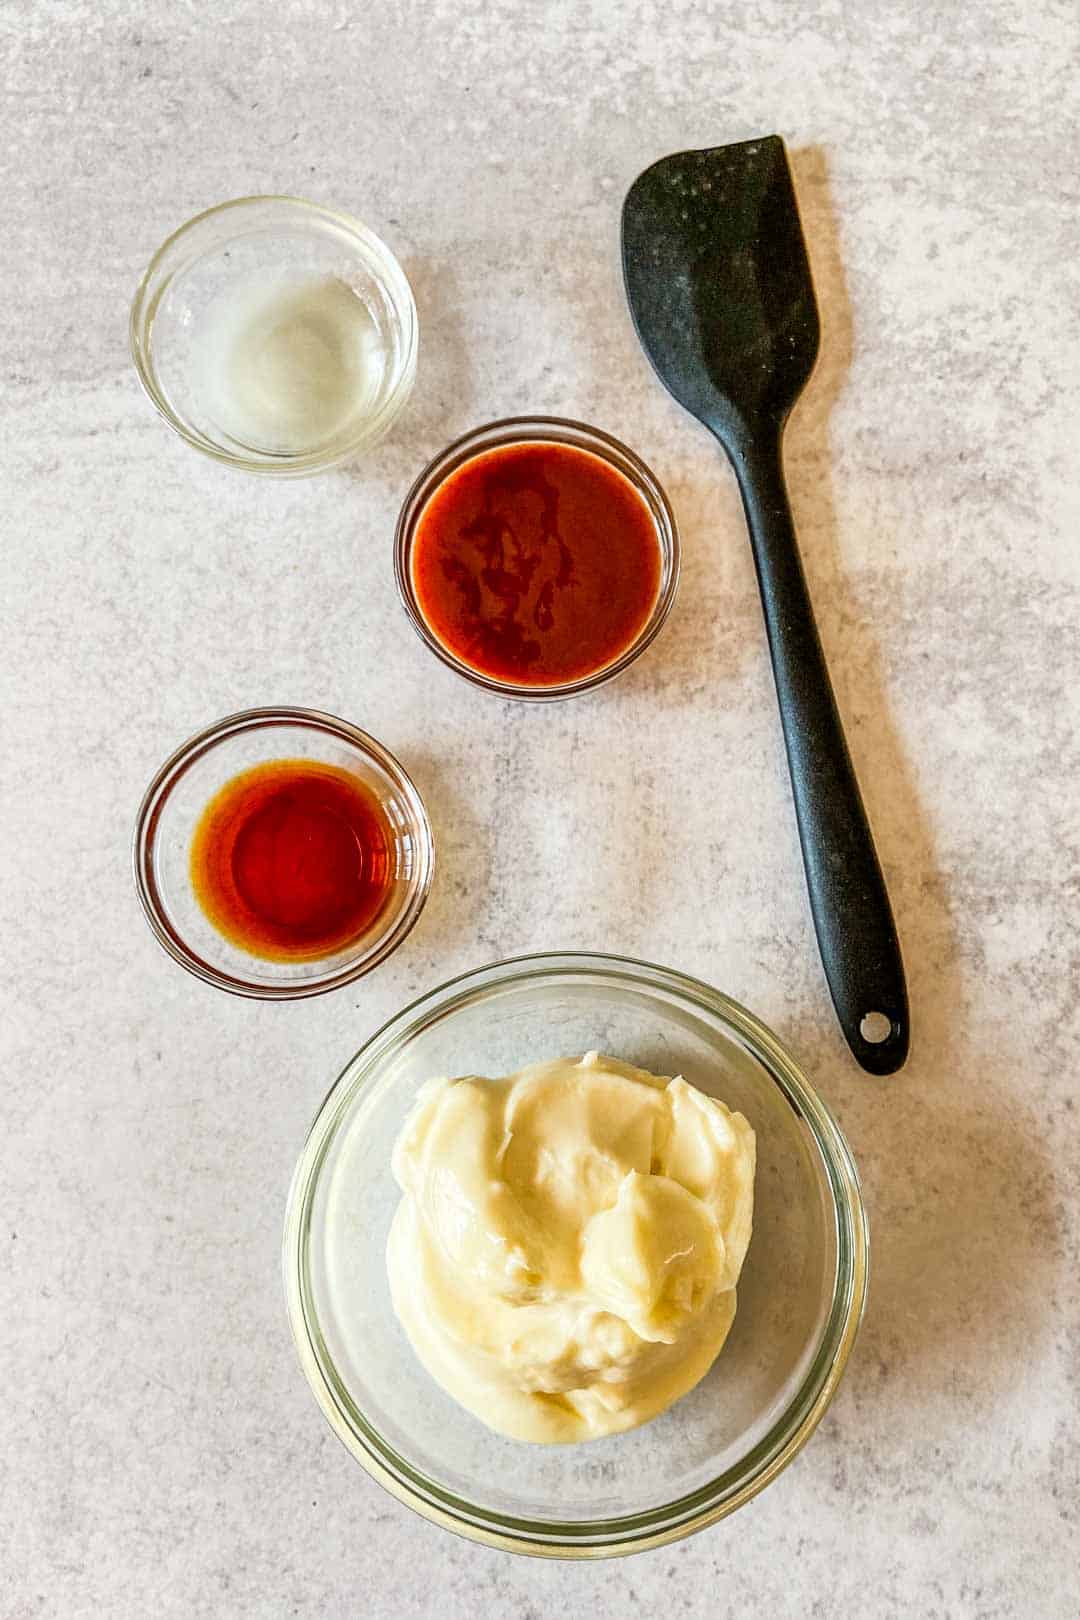 Spicy mayo ingredients with a small spatula.